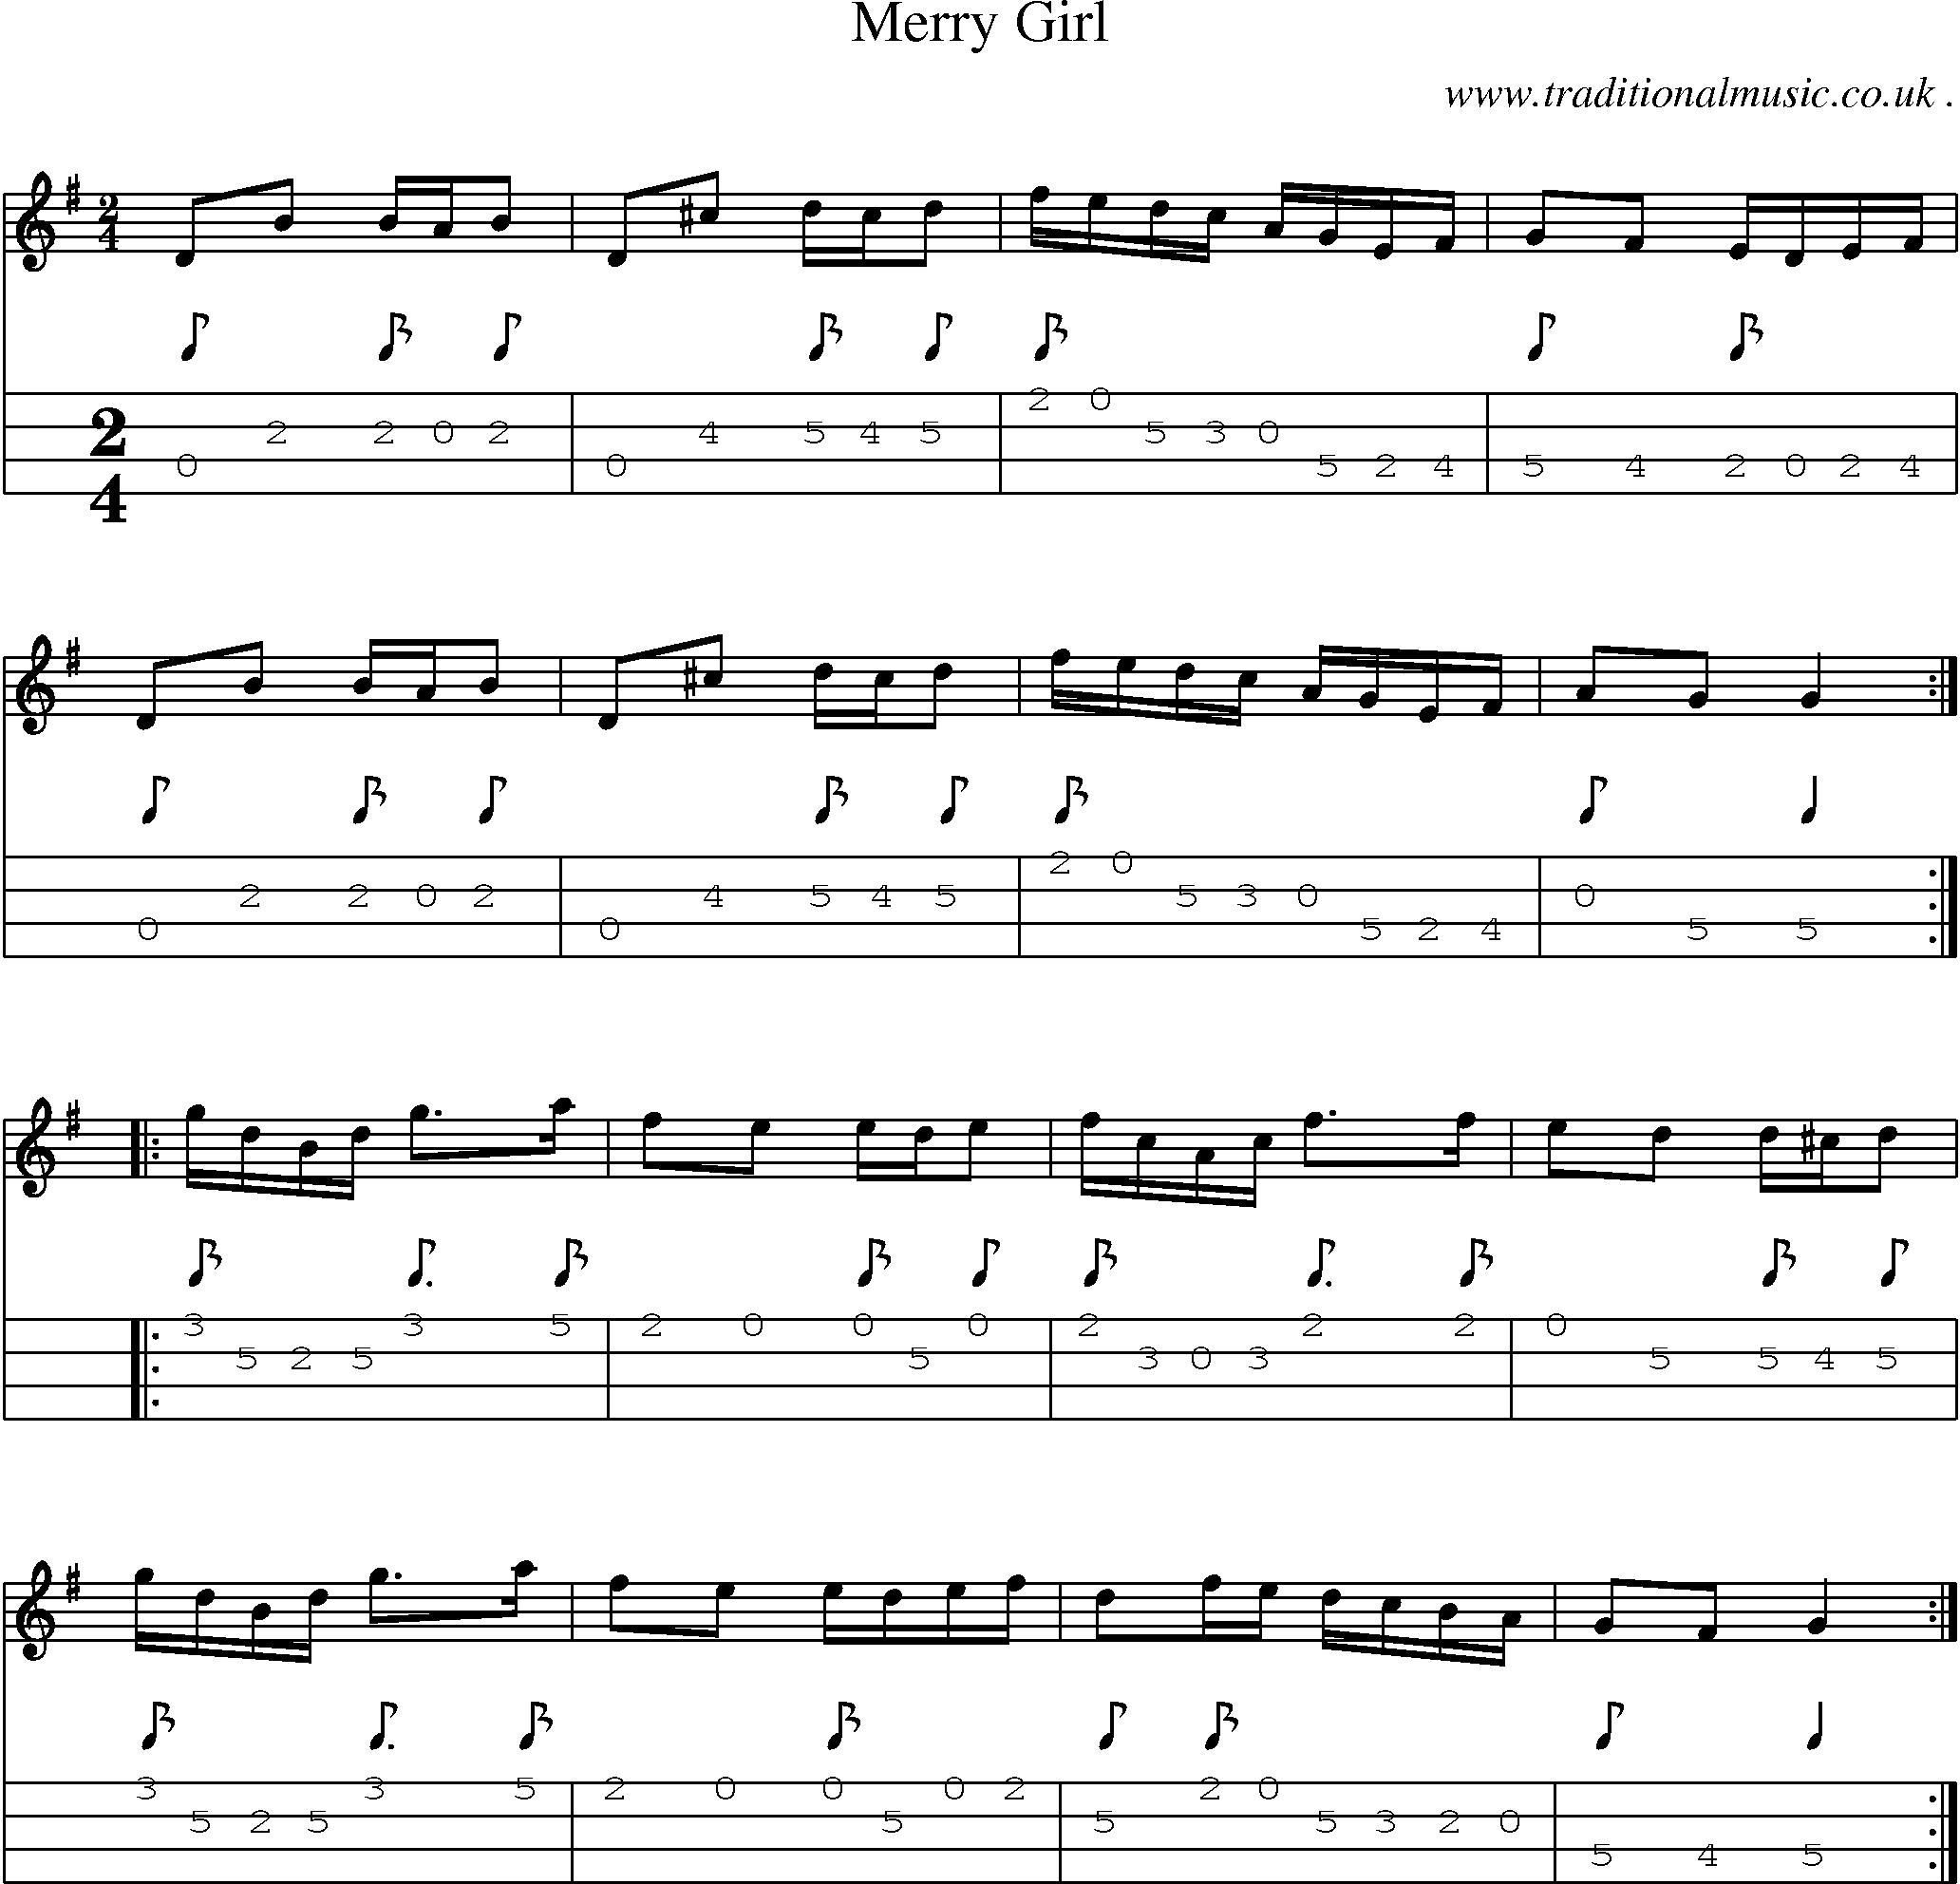 Sheet-Music and Mandolin Tabs for Merry Girl